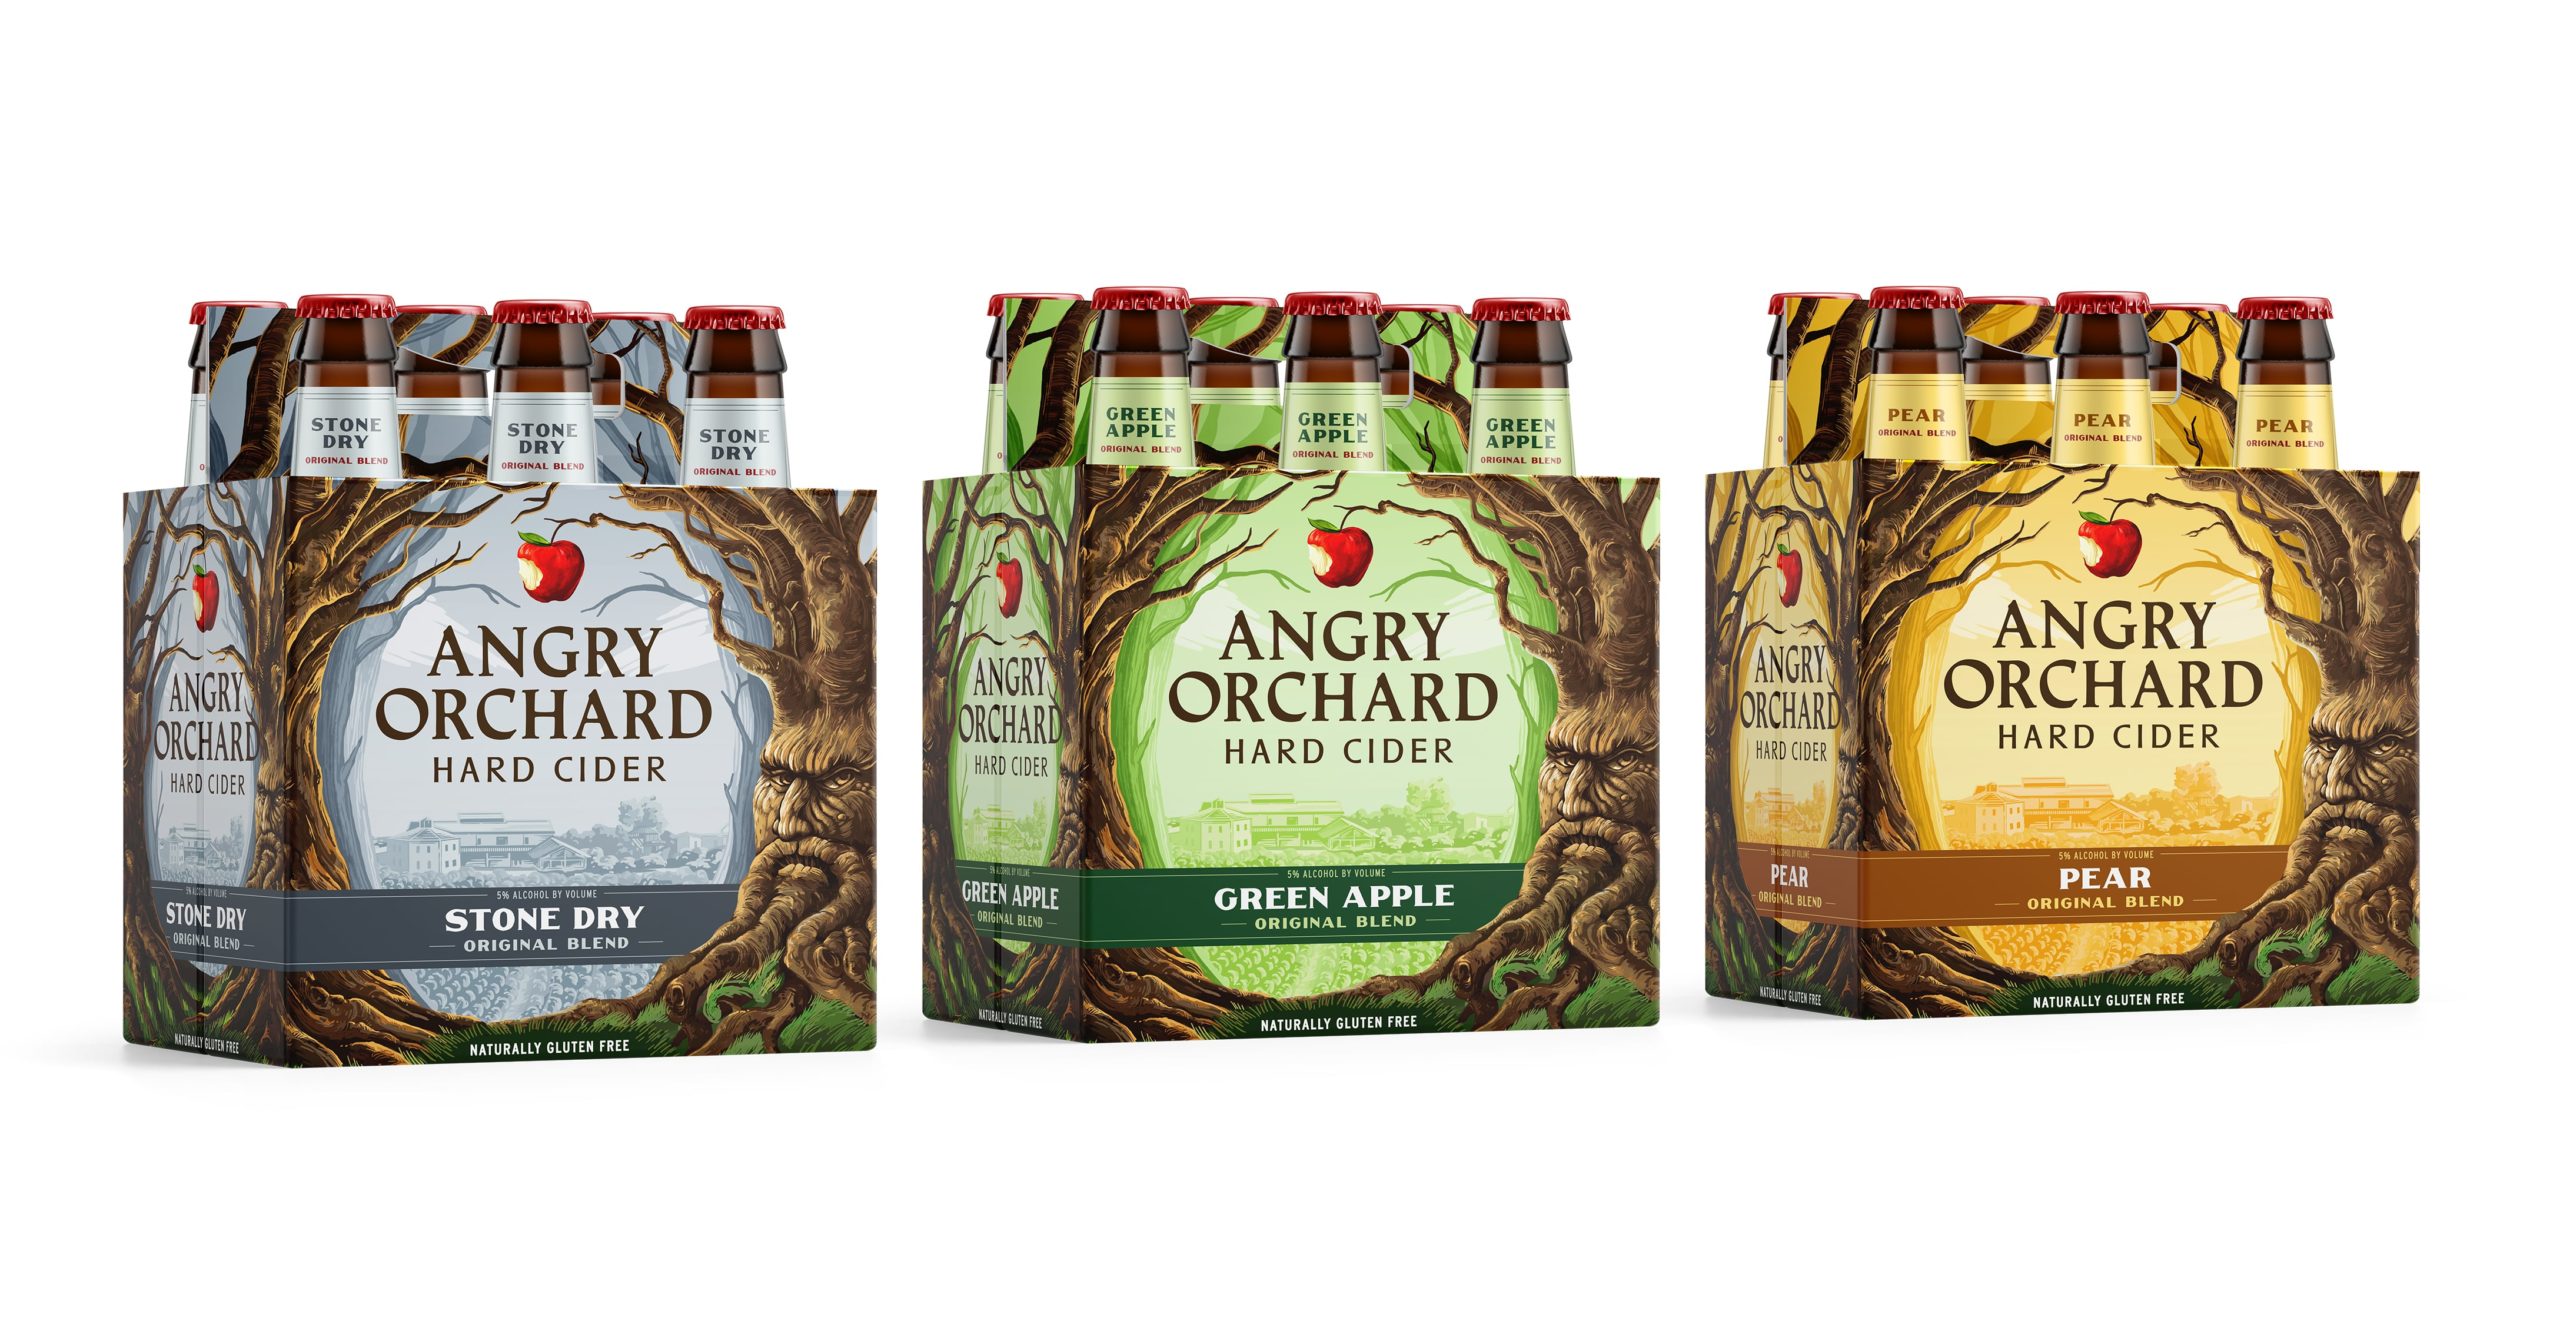 moxie-sozo-Angry-Orchard-Landscape-02-scaled